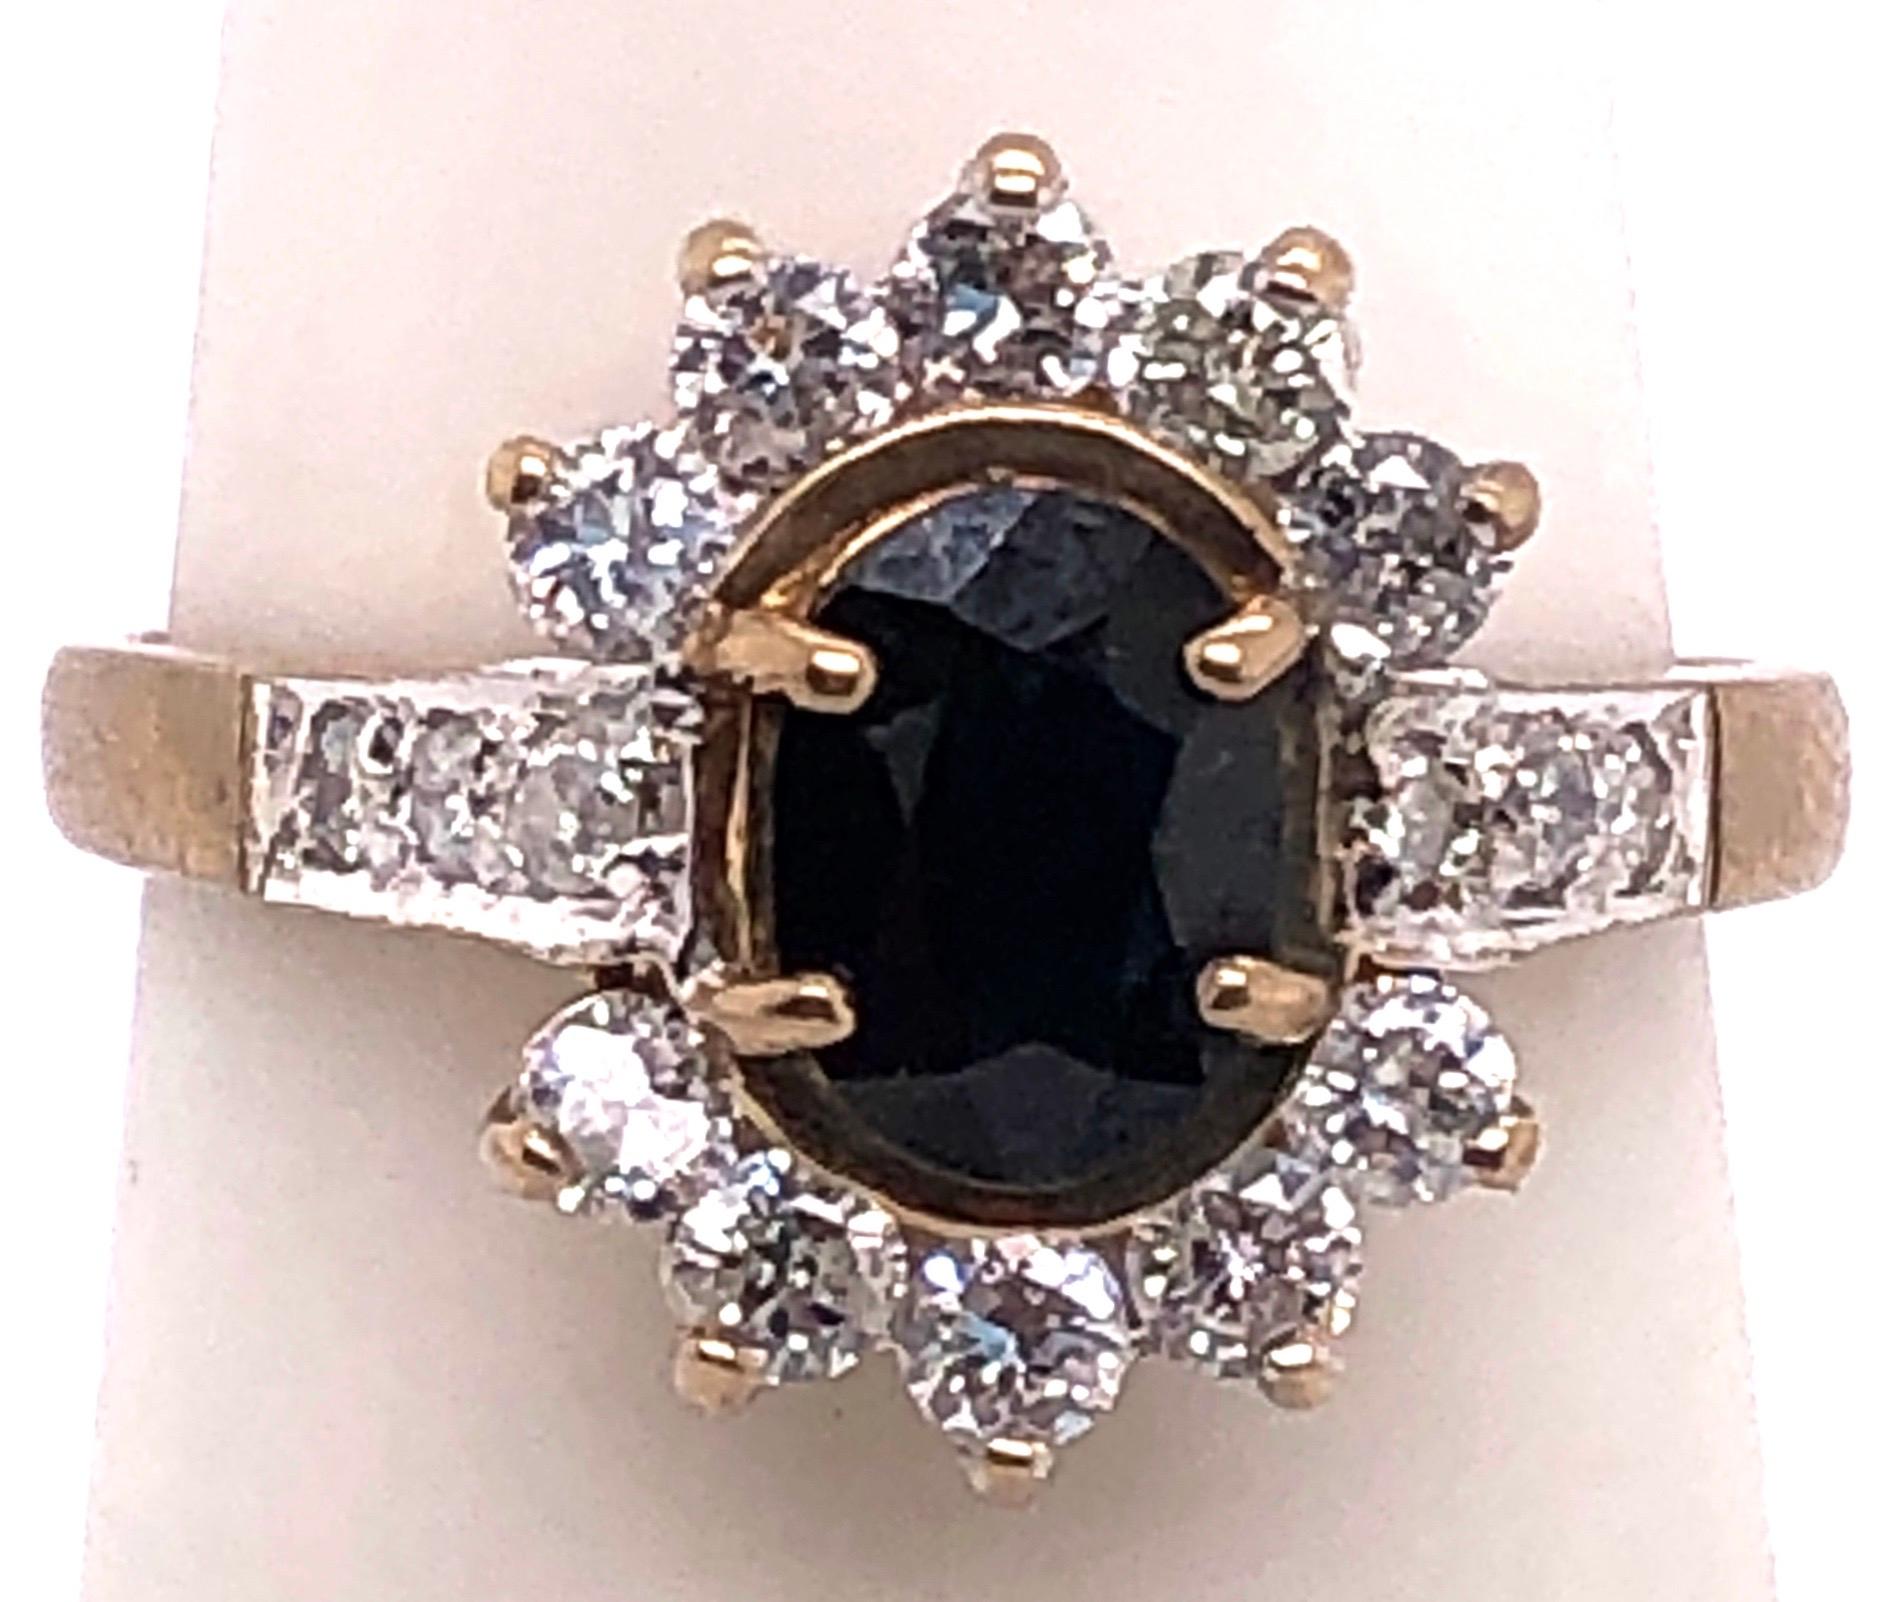 10 Karat Yellow and White Gold Onyx Solitaire Ring with Diamond Accents In Good Condition For Sale In Stamford, CT